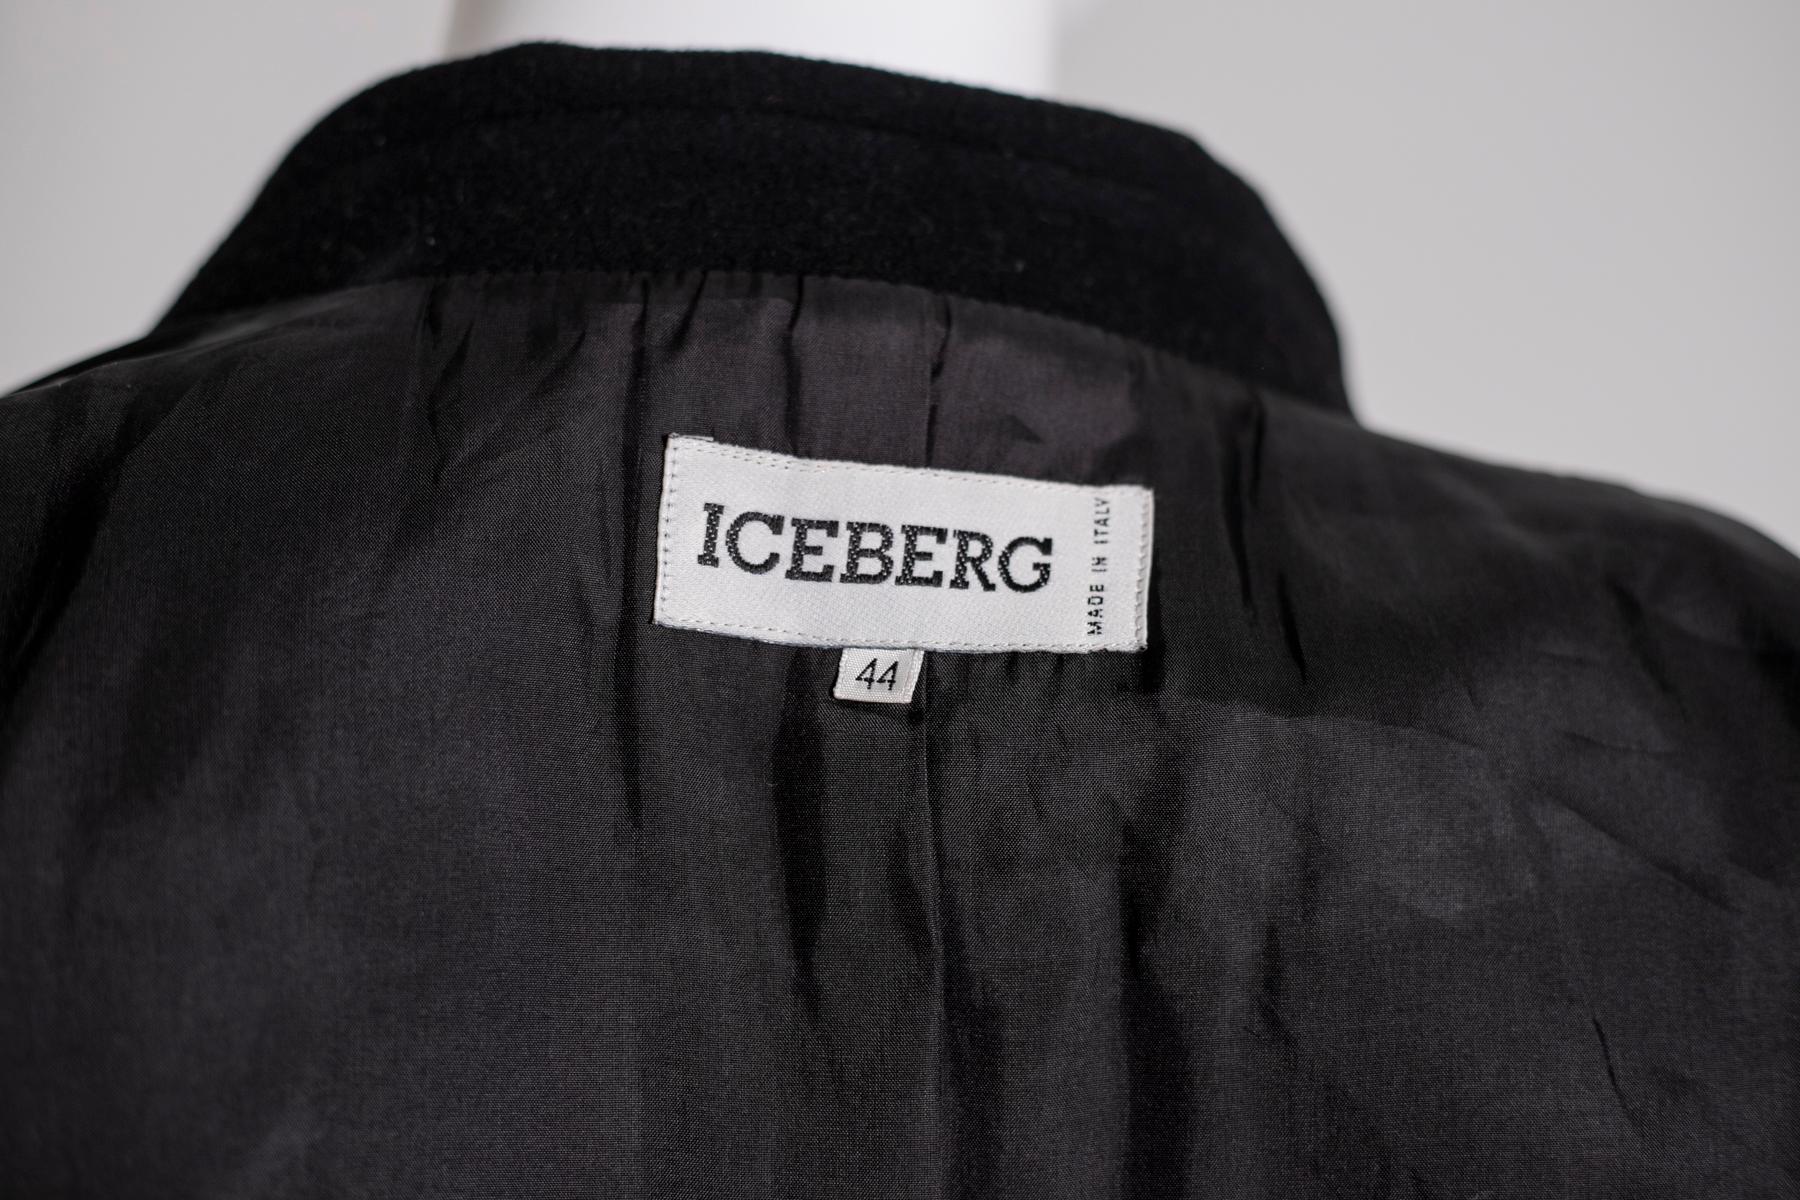 Lovely double-breasted wool jacket designed by Iceberg in the 1990s, made in Italy. 
ORIGINAL LABEL.
The jacket is totally made of black wool, very elegant. The jacket has the classic long-listed collar that connects to the center of the jacket with